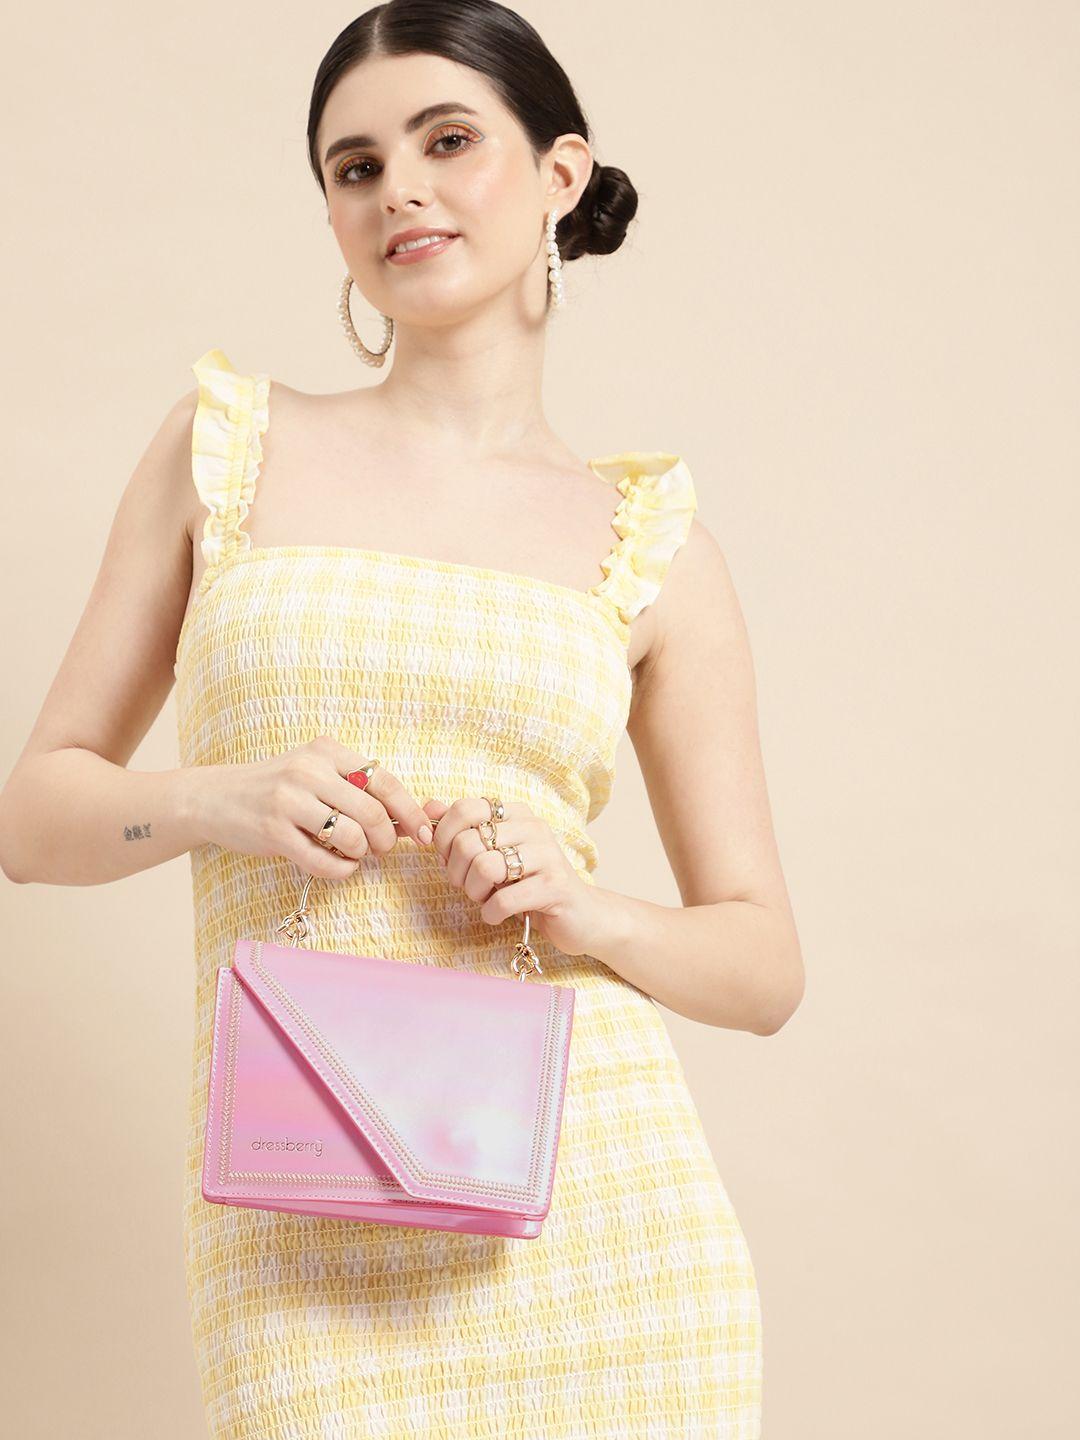 dressberry solid pu structured satchel with mini embroidered detail & iridescent effect